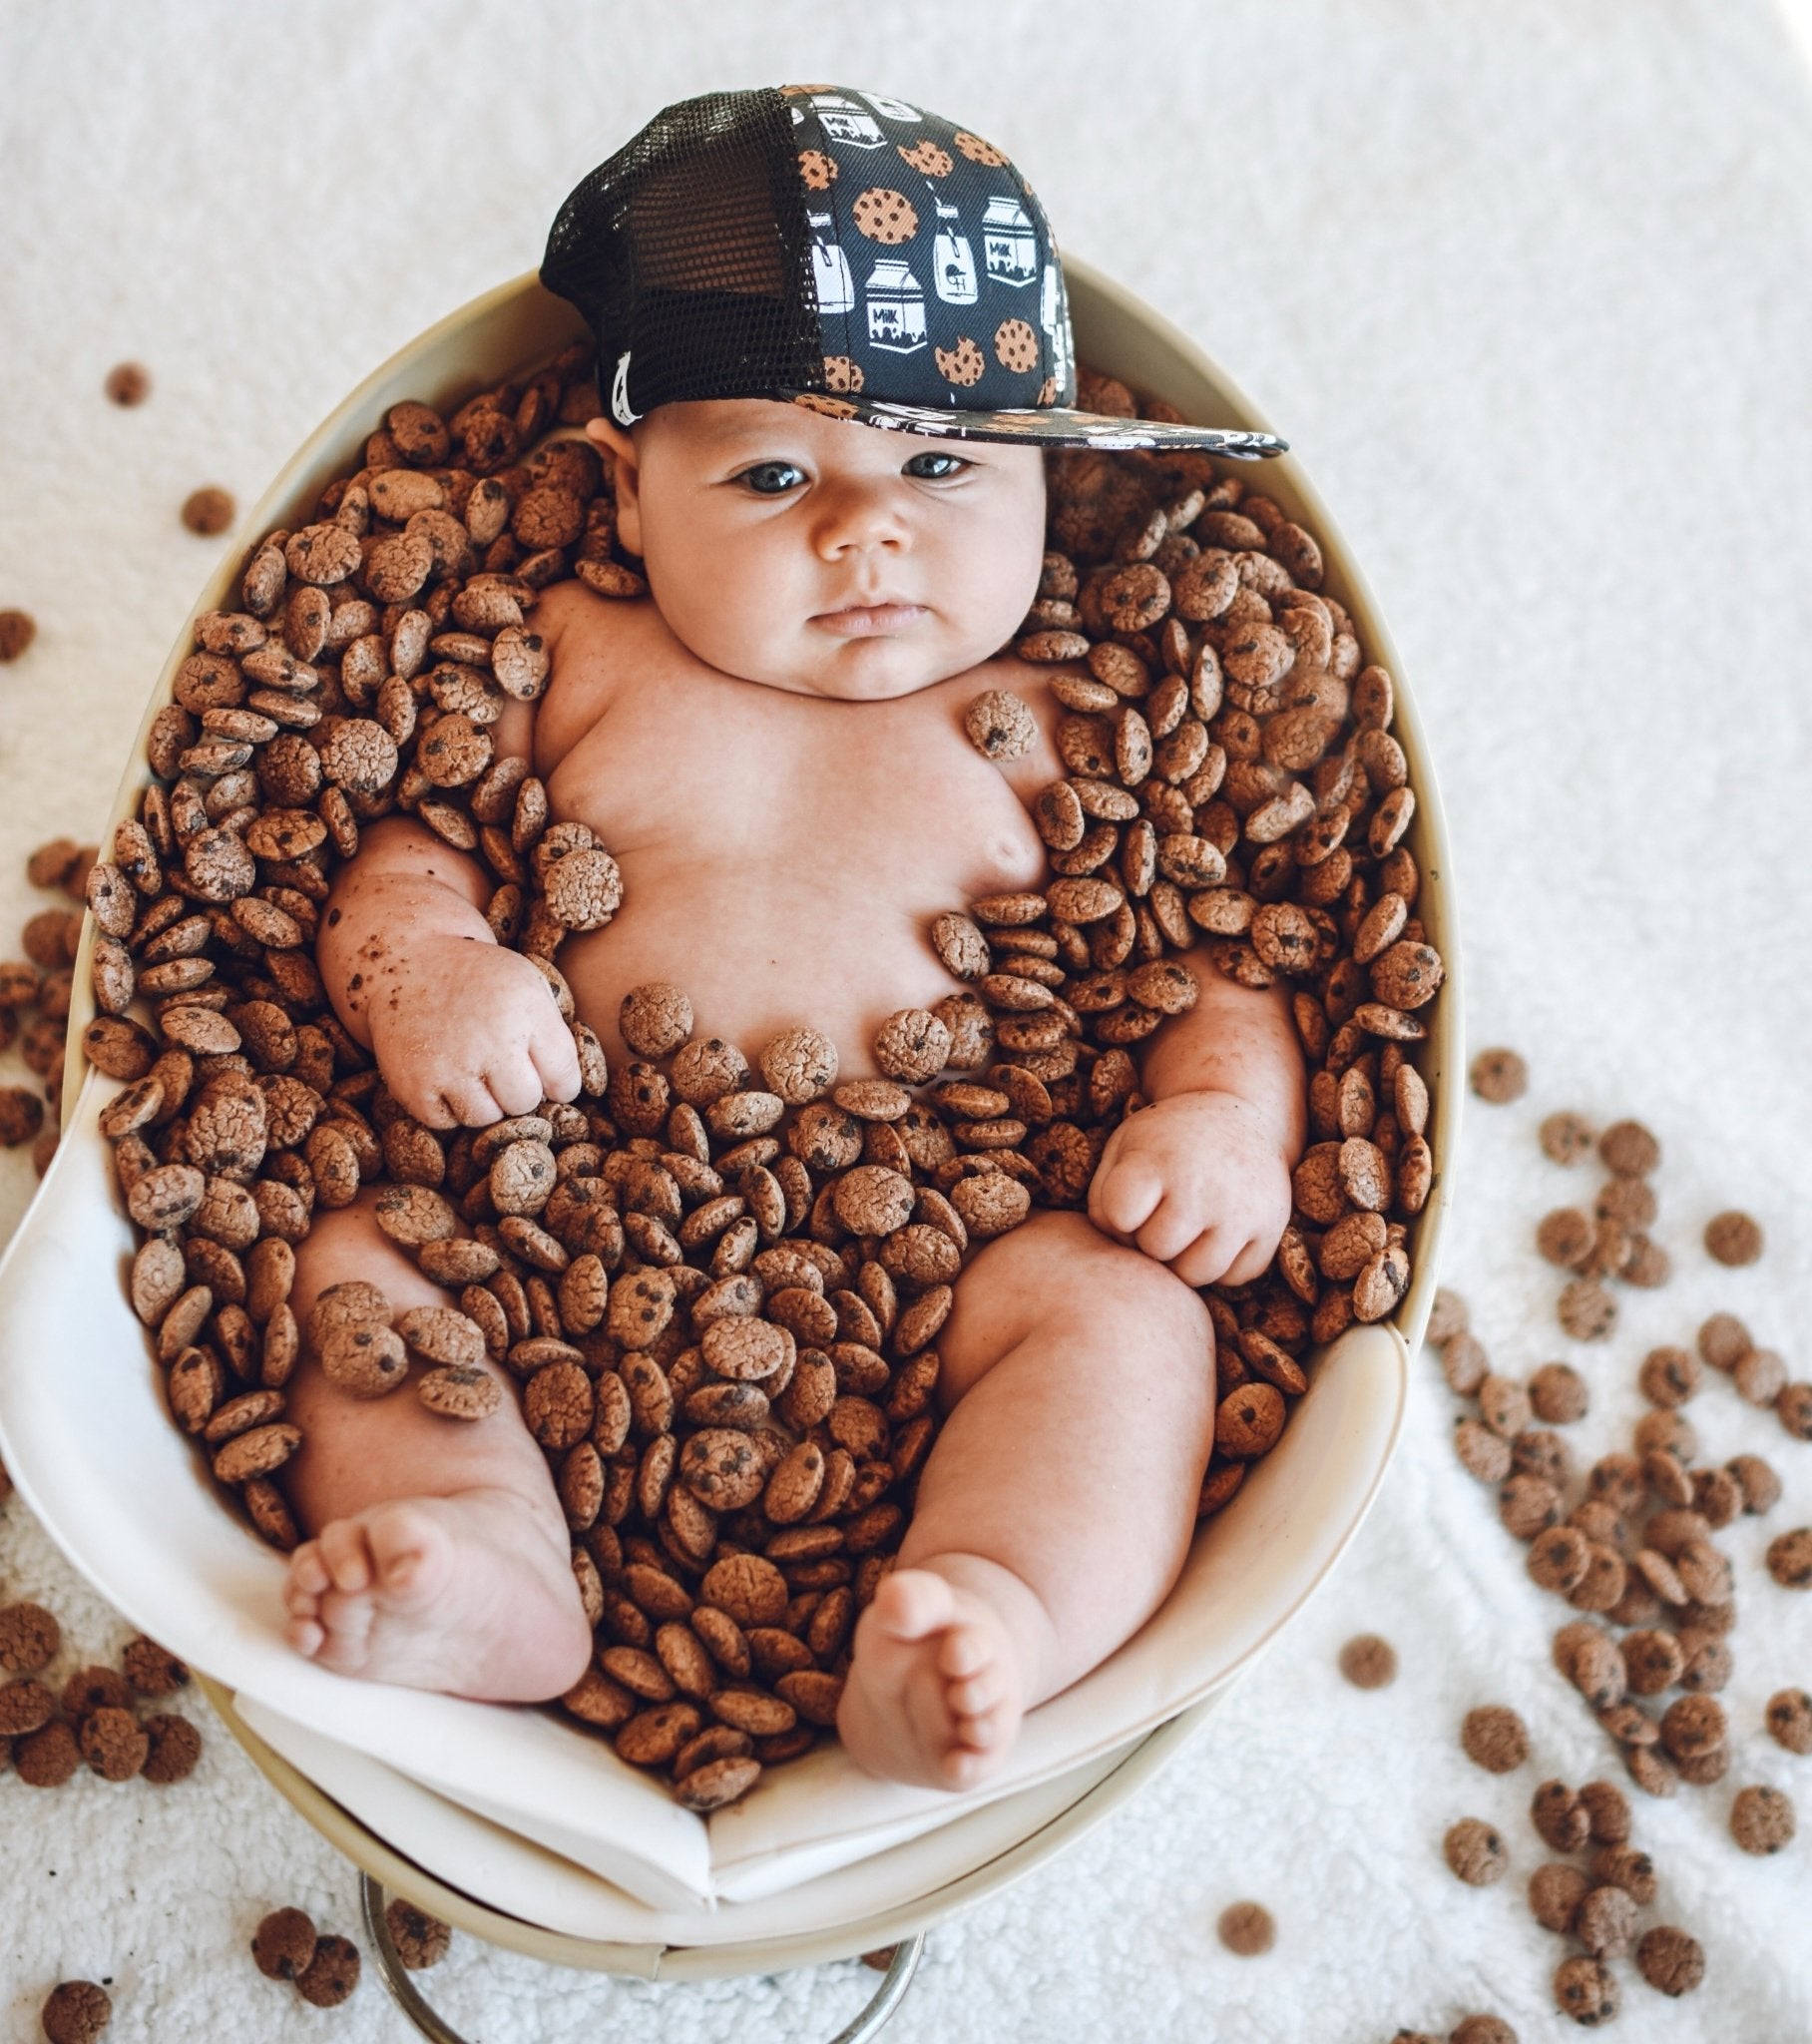 Image of a baby laying in a bowl filled with small cookies and wearing the Milk and Cookies kids trucker hat from George Hats